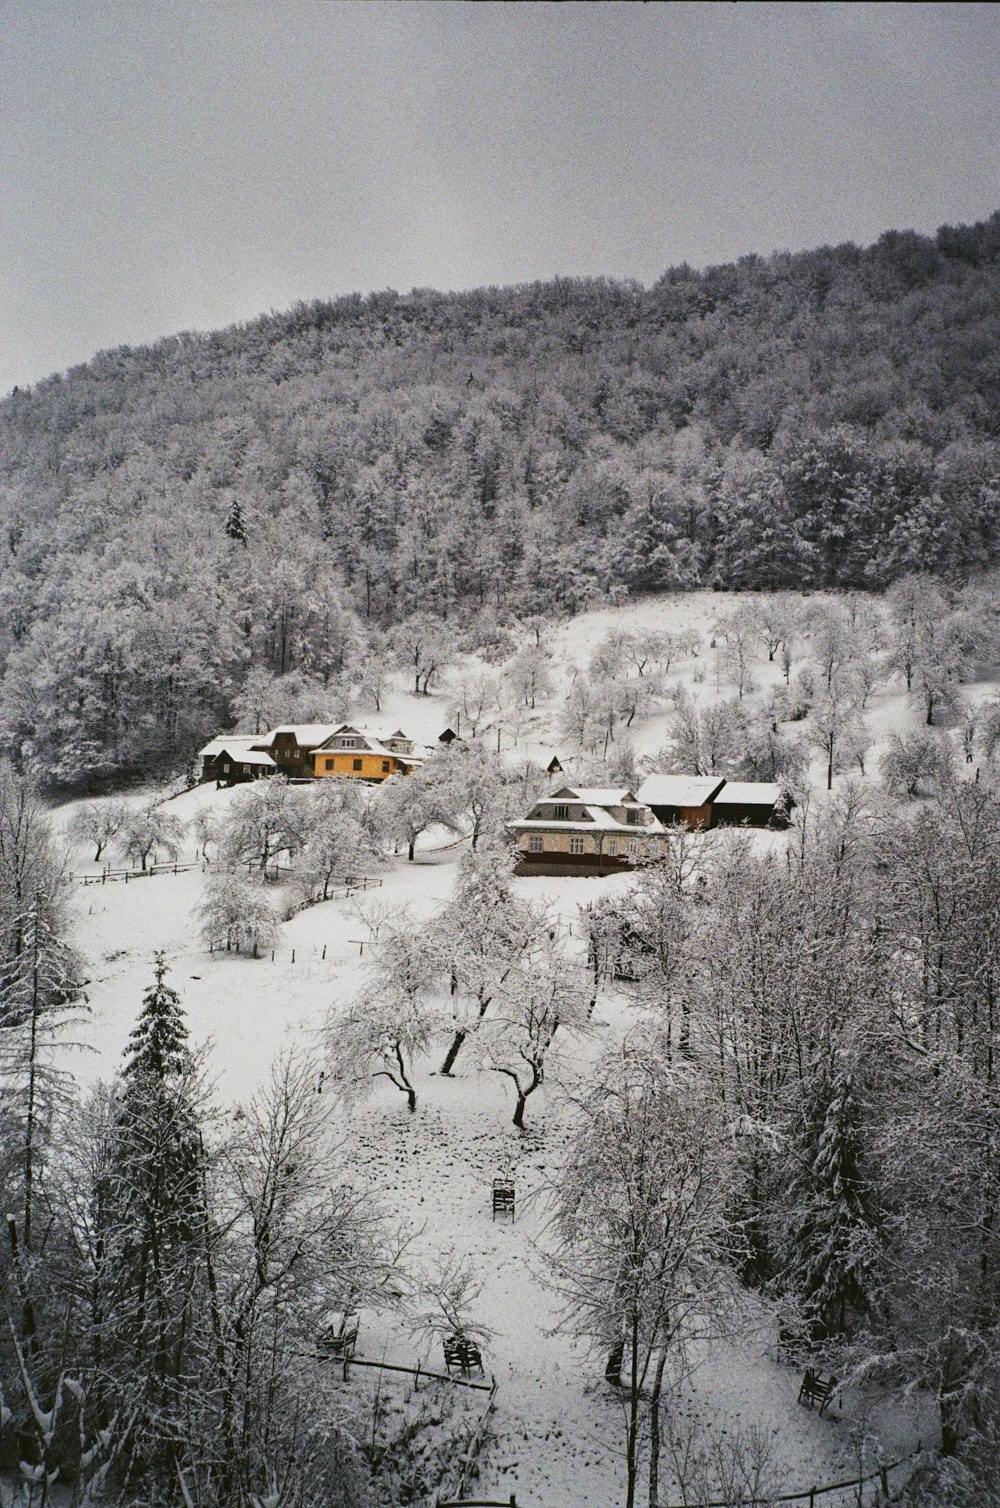 a snowy landscape with houses and trees in the foreground